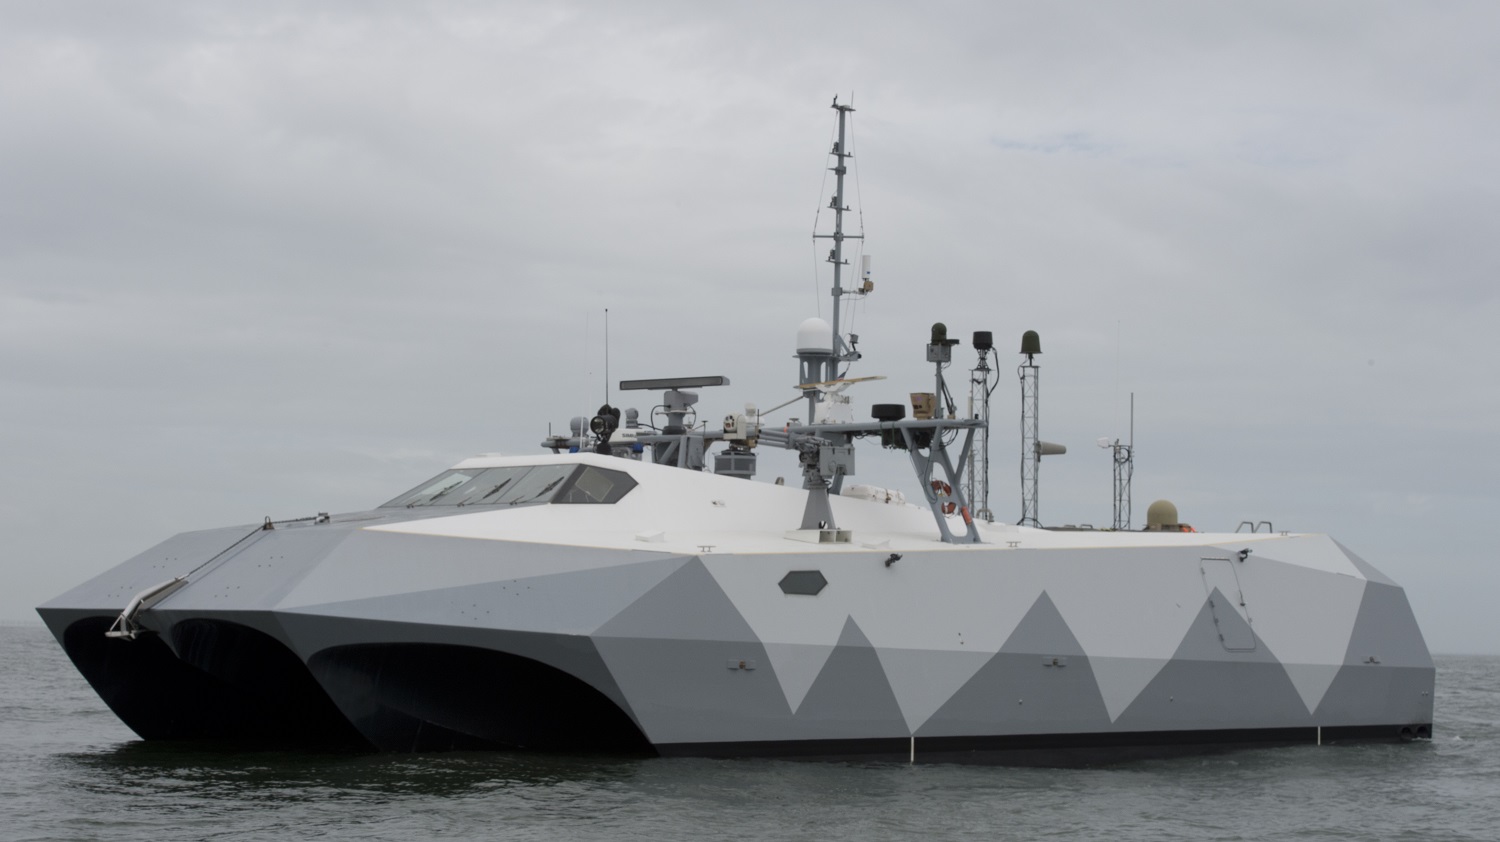 Stiletto off the coast of Virginia Beach, Va., April 21, 2015. The vessel sponsored by the Office of the Secretary of Defense was at Joint Expeditionary Base Little Creek-Fort Story, for a two-week capability demonstration program for CNO’s Rapid Innovation Cell to assess new concepts for command and control and multi-sensor fusion technologies for small vessels. U.S. Navy photo by Devin Pisner.